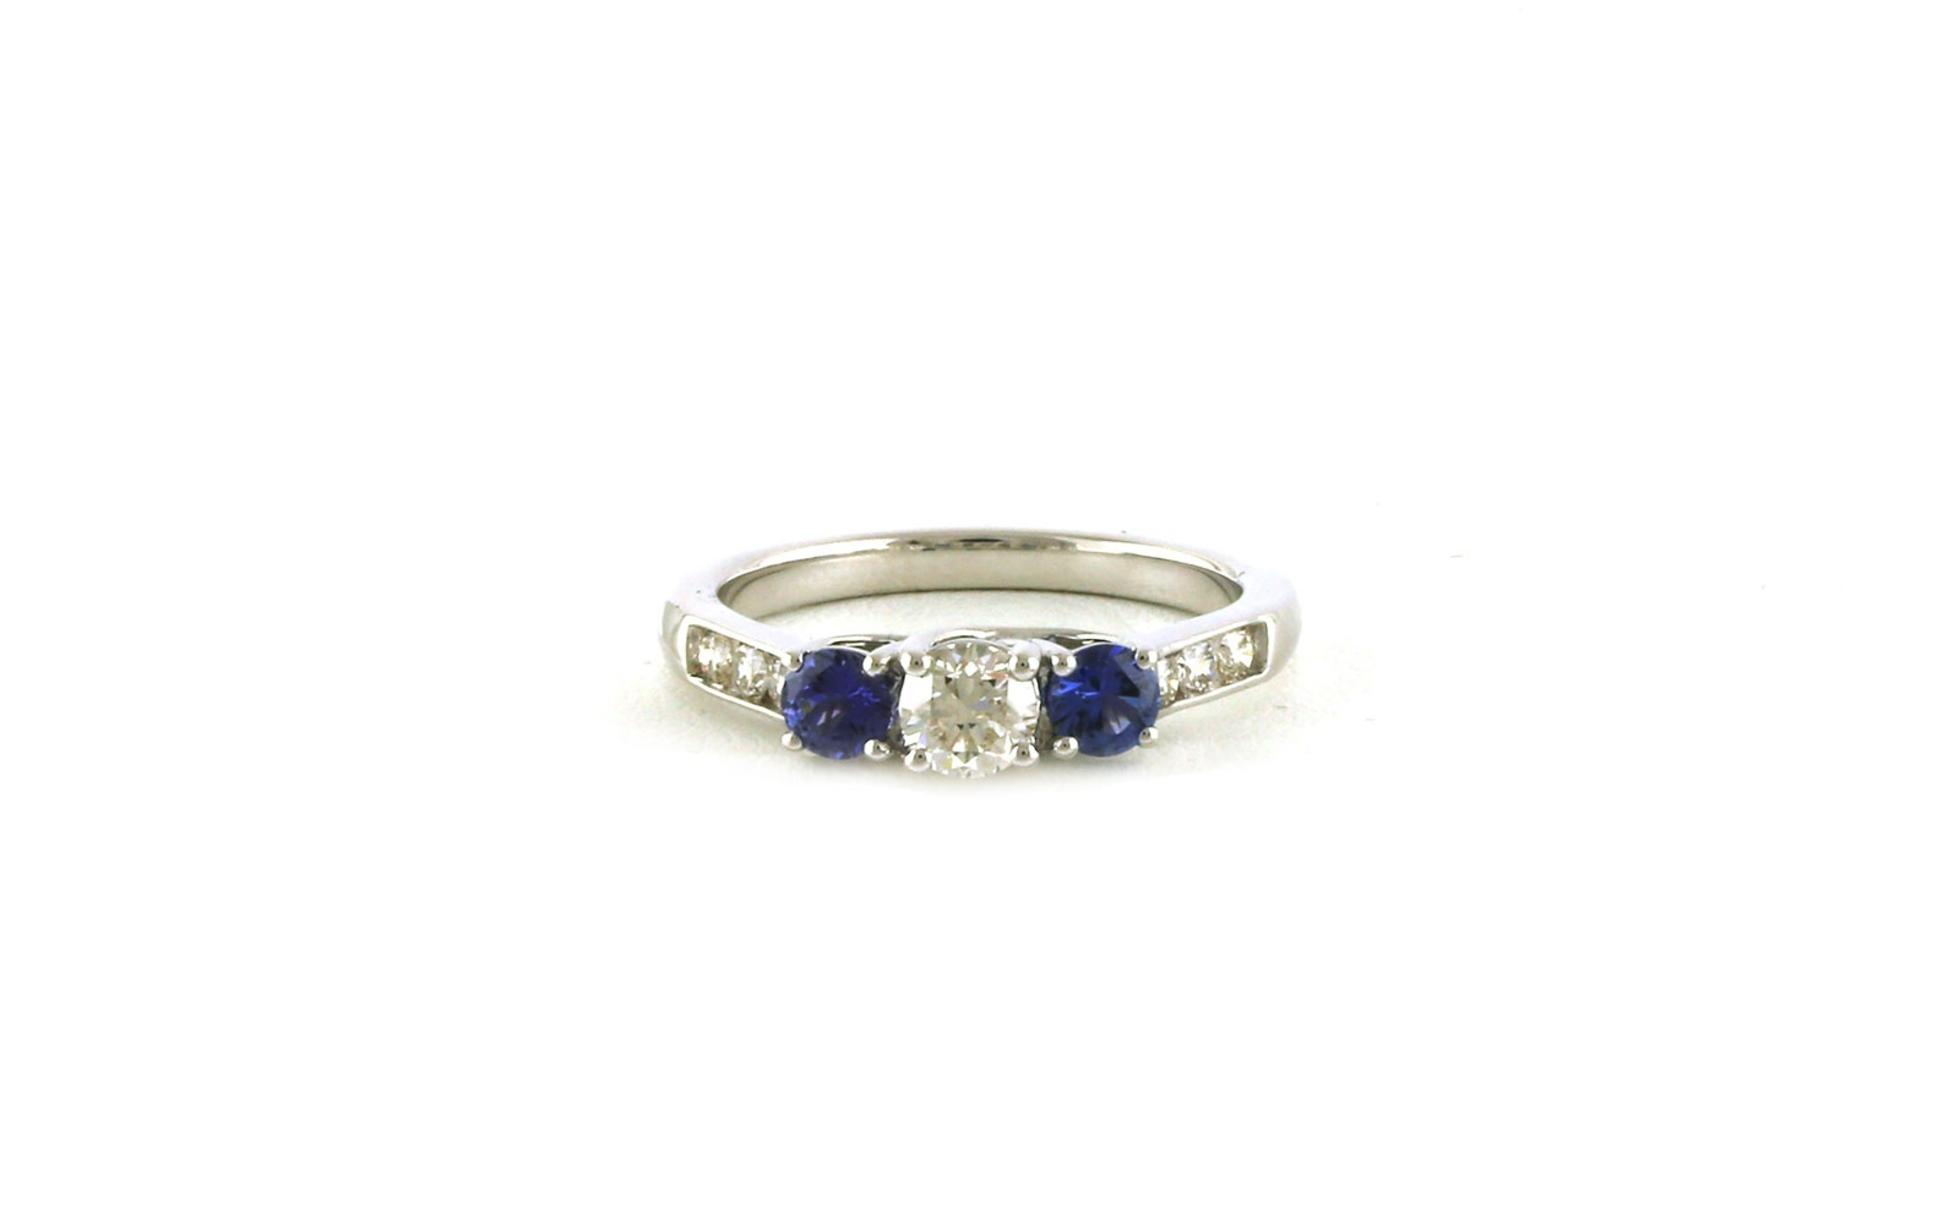 3-Stone Diamond and Montana Yogo Sapphire Ring with Channel-set Accent Diamonds in White Gold (1.10cts TWT)